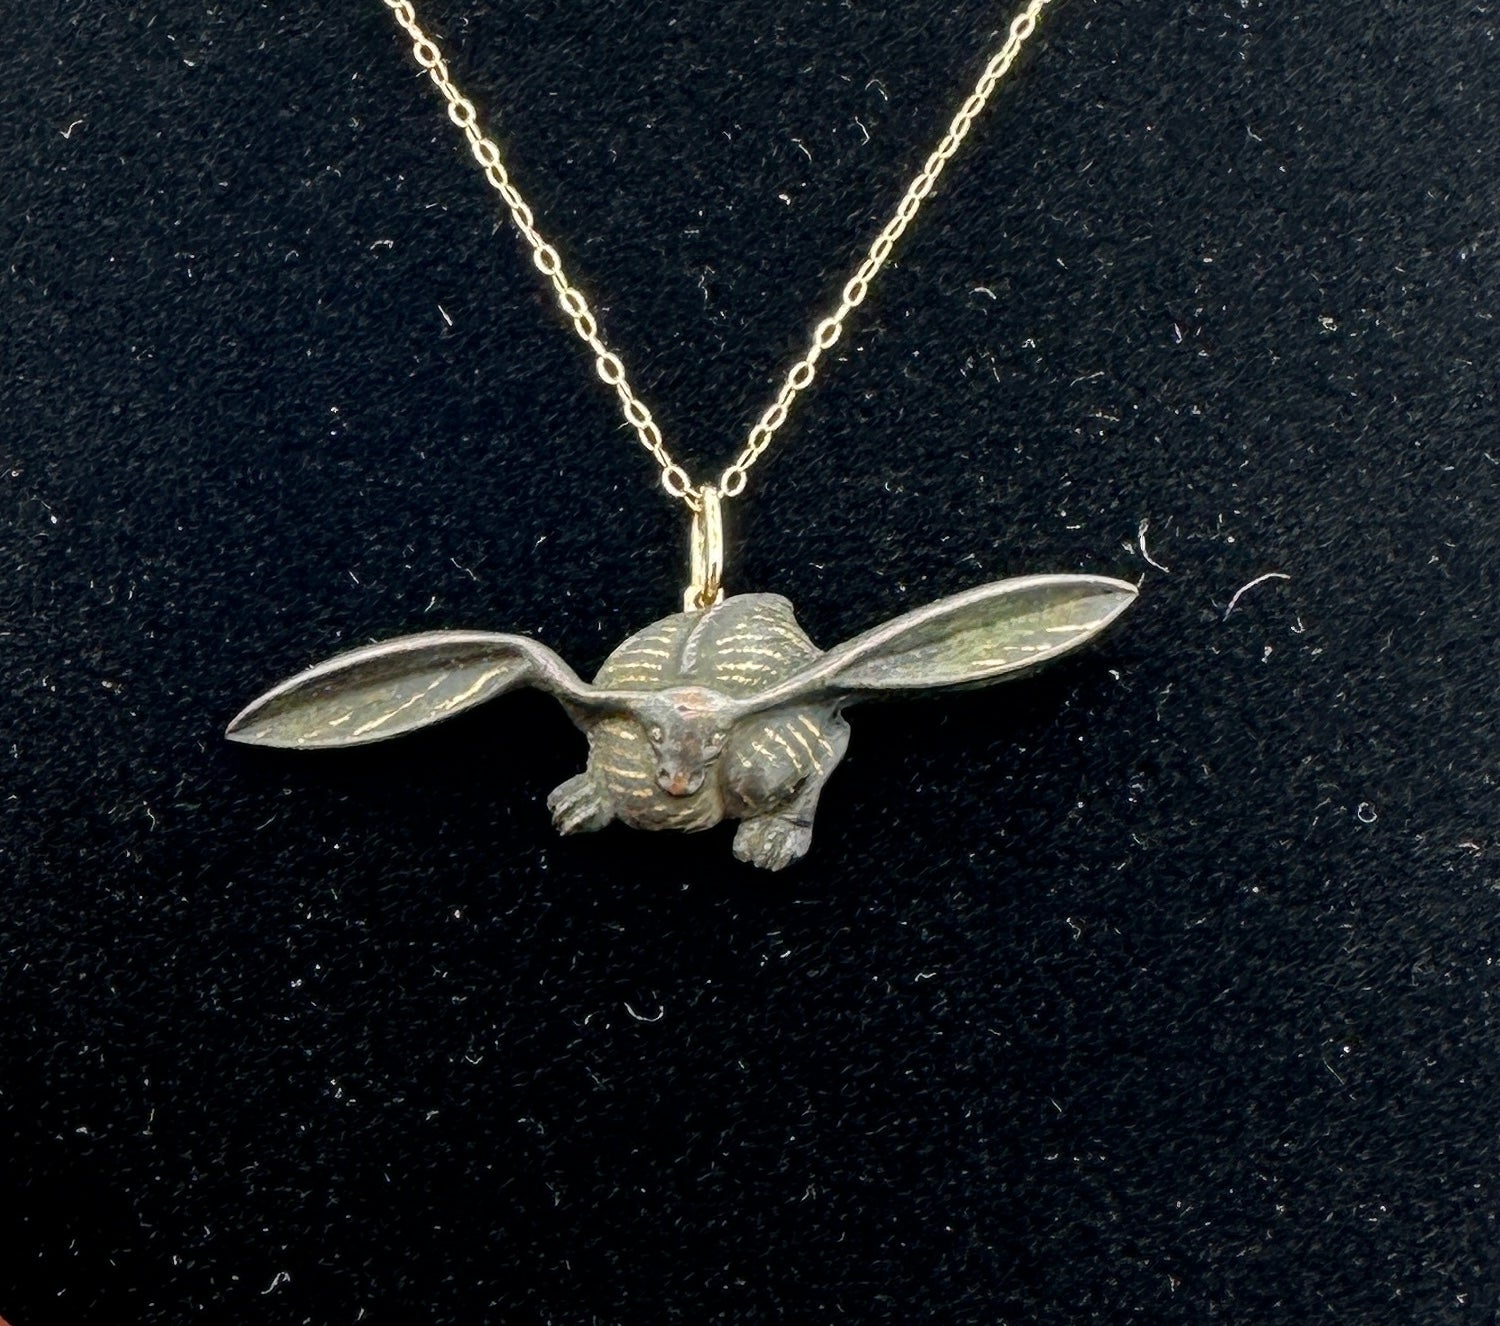 This is a very rare Japanese Shakudo Pendant Necklace in the form of a Bunny Rabbit.  The pendant is a stunning example of the Shakudo art form with the grace and proportion of the image and the Japanese aesthetic of asymmetry.  The crouching rabbit